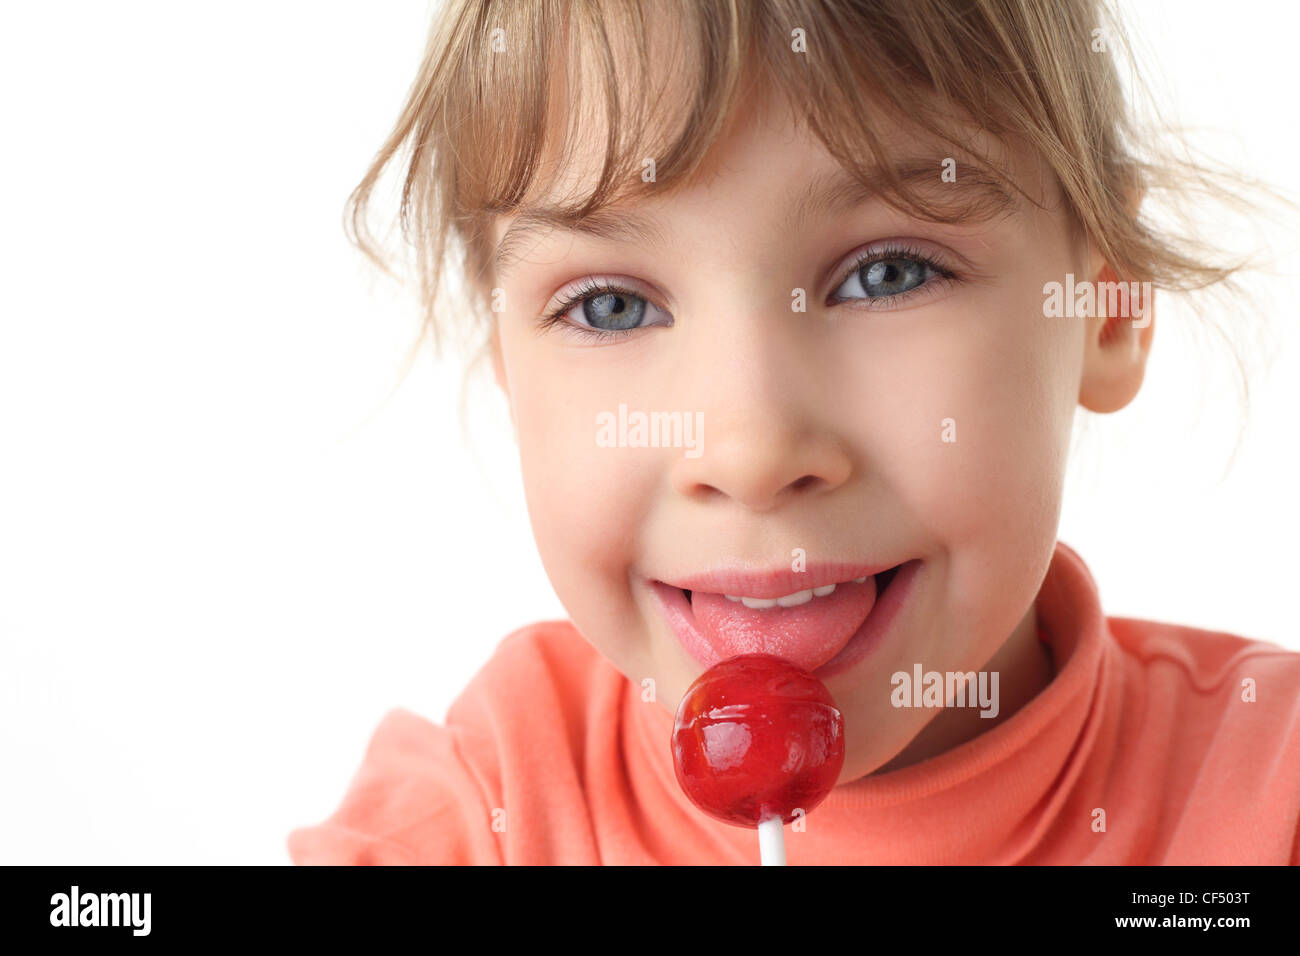 girl eating red lollipop, half body, front view, isolated on white Stock Photo